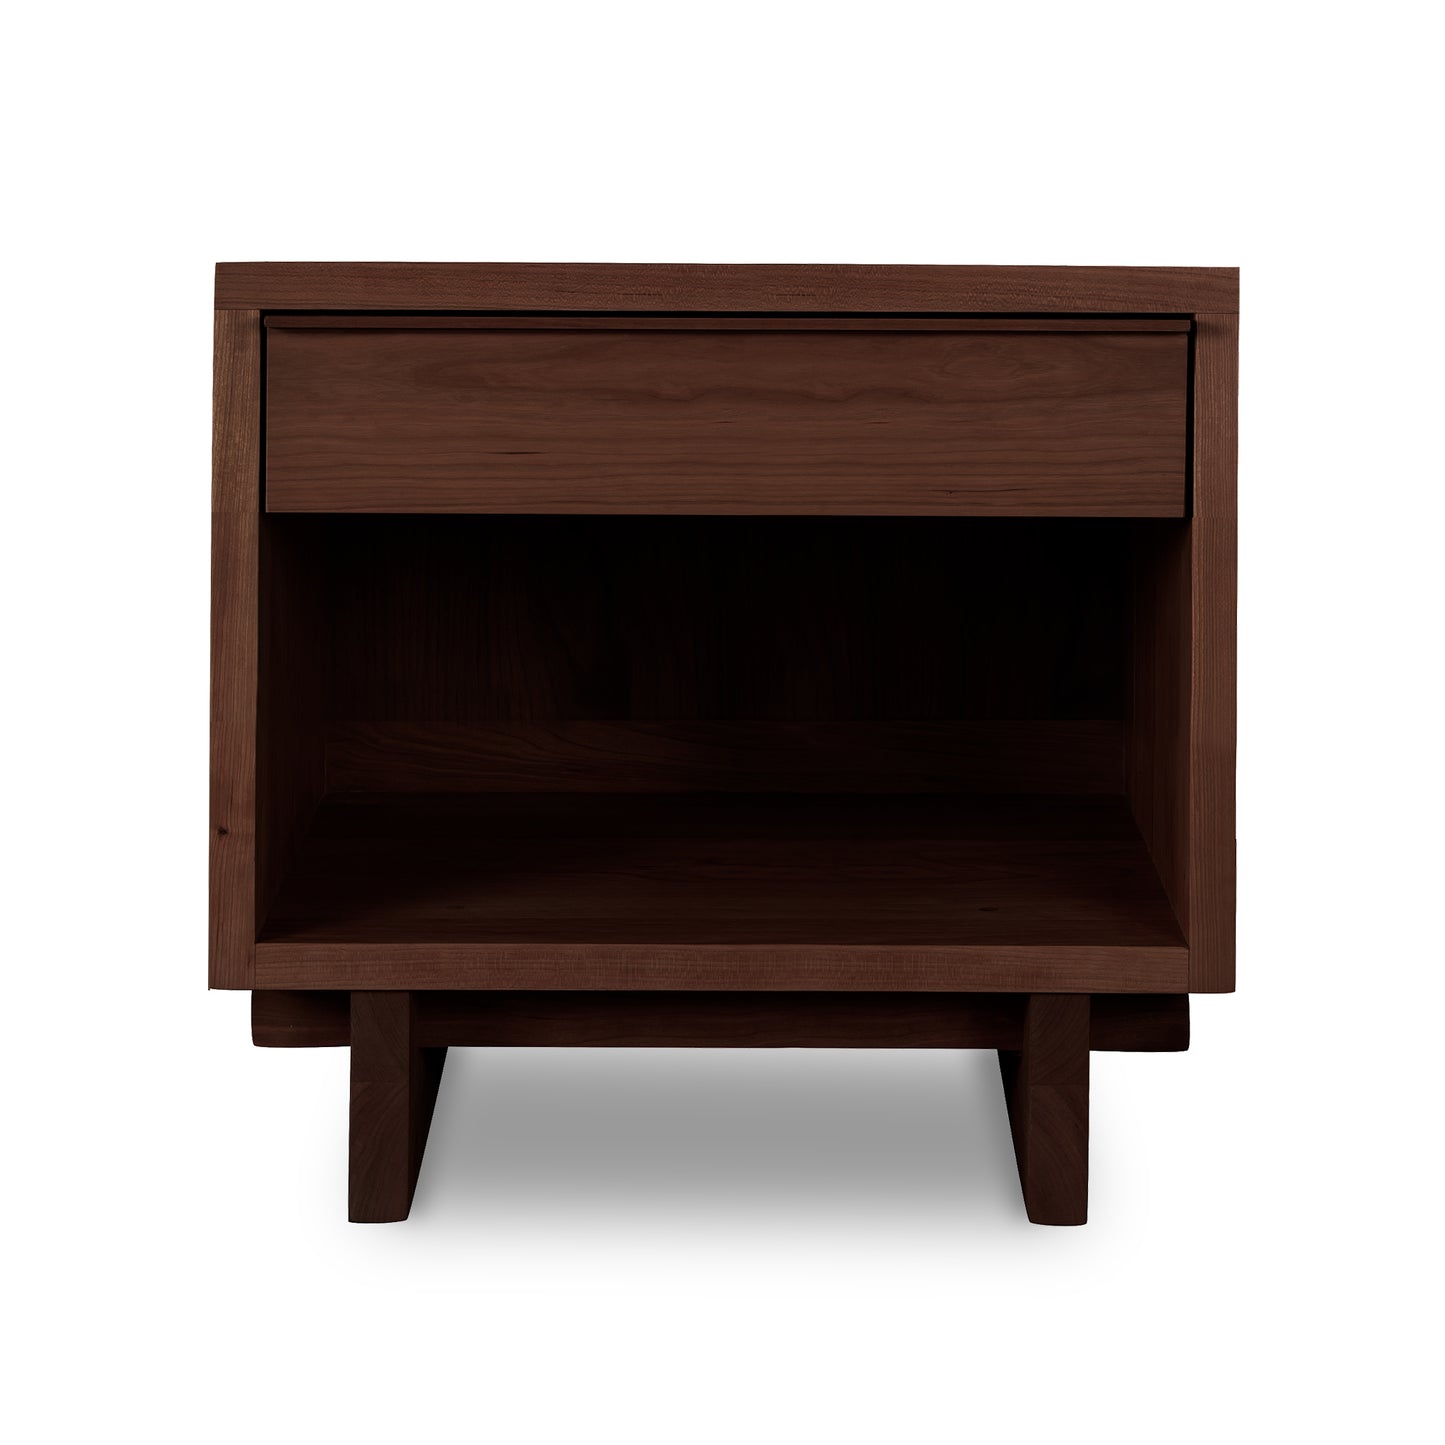 A Vermont Furniture Designs Kipling 1-Drawer Enclosed Shelf Wide Nightstand with two drawers and a shelf.